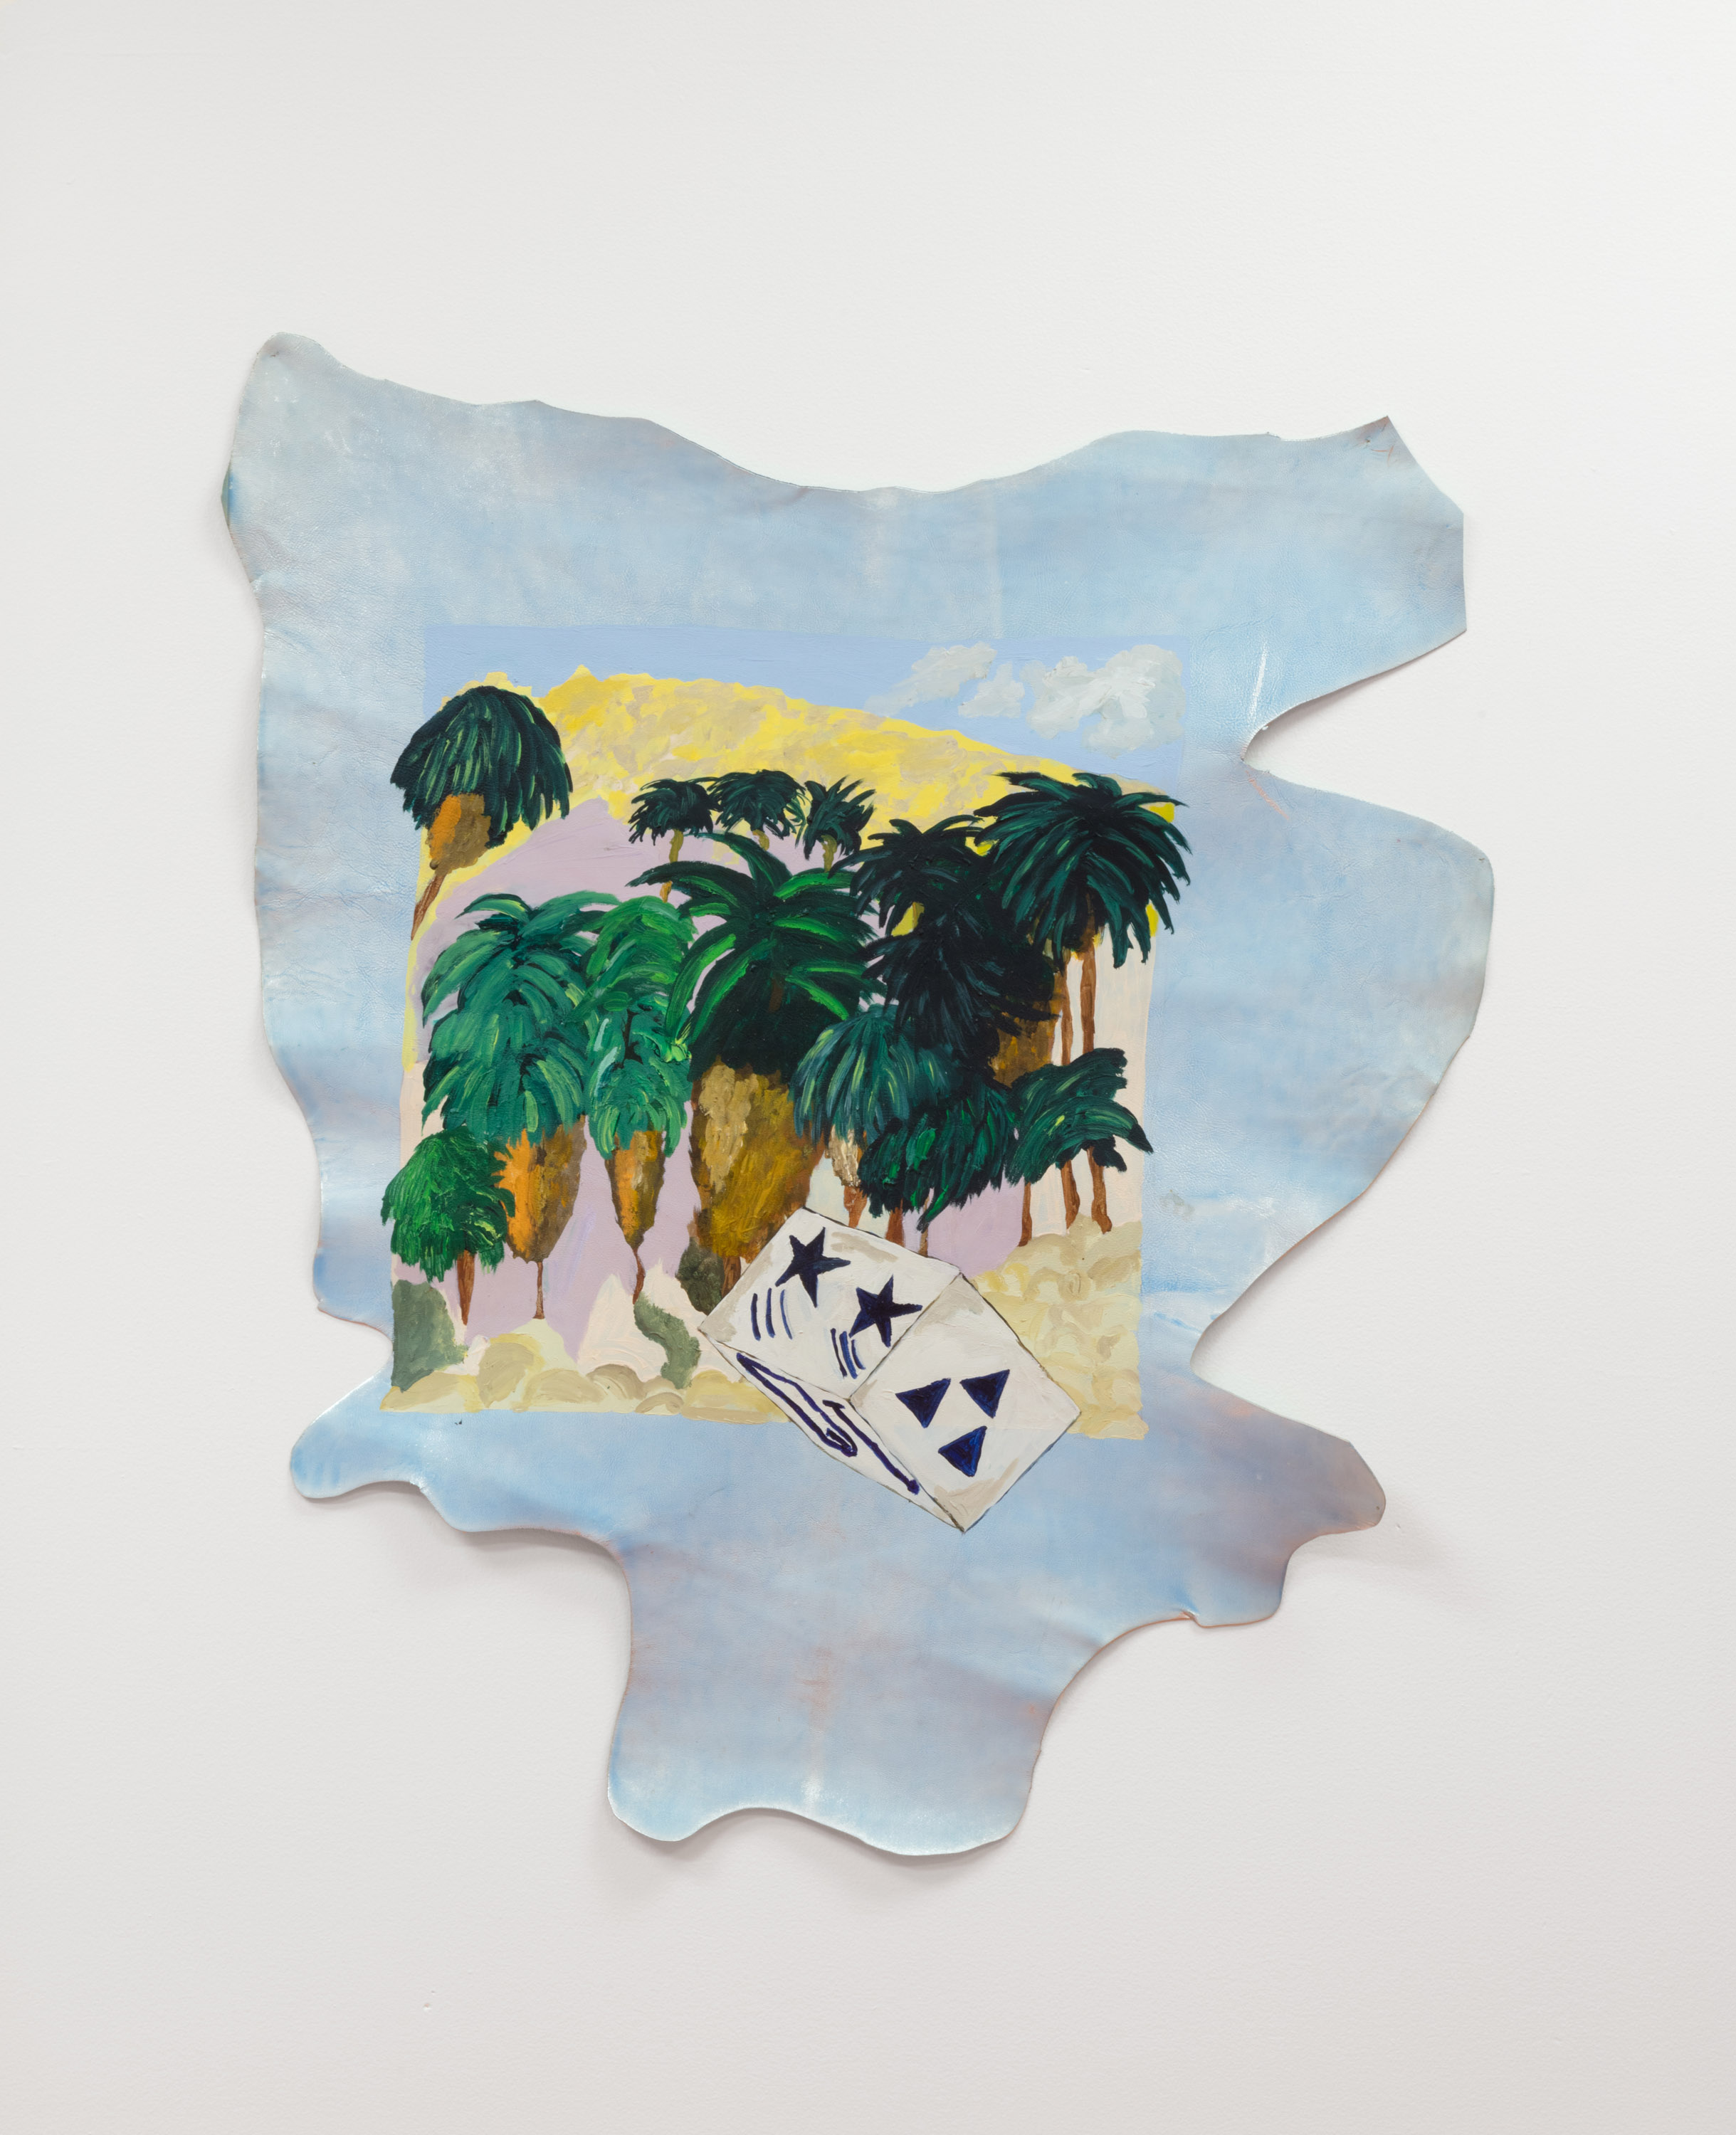  Micah Wood,  29 Palms Oasis , 2019, acrylic on leather, 36 x 29 inches 